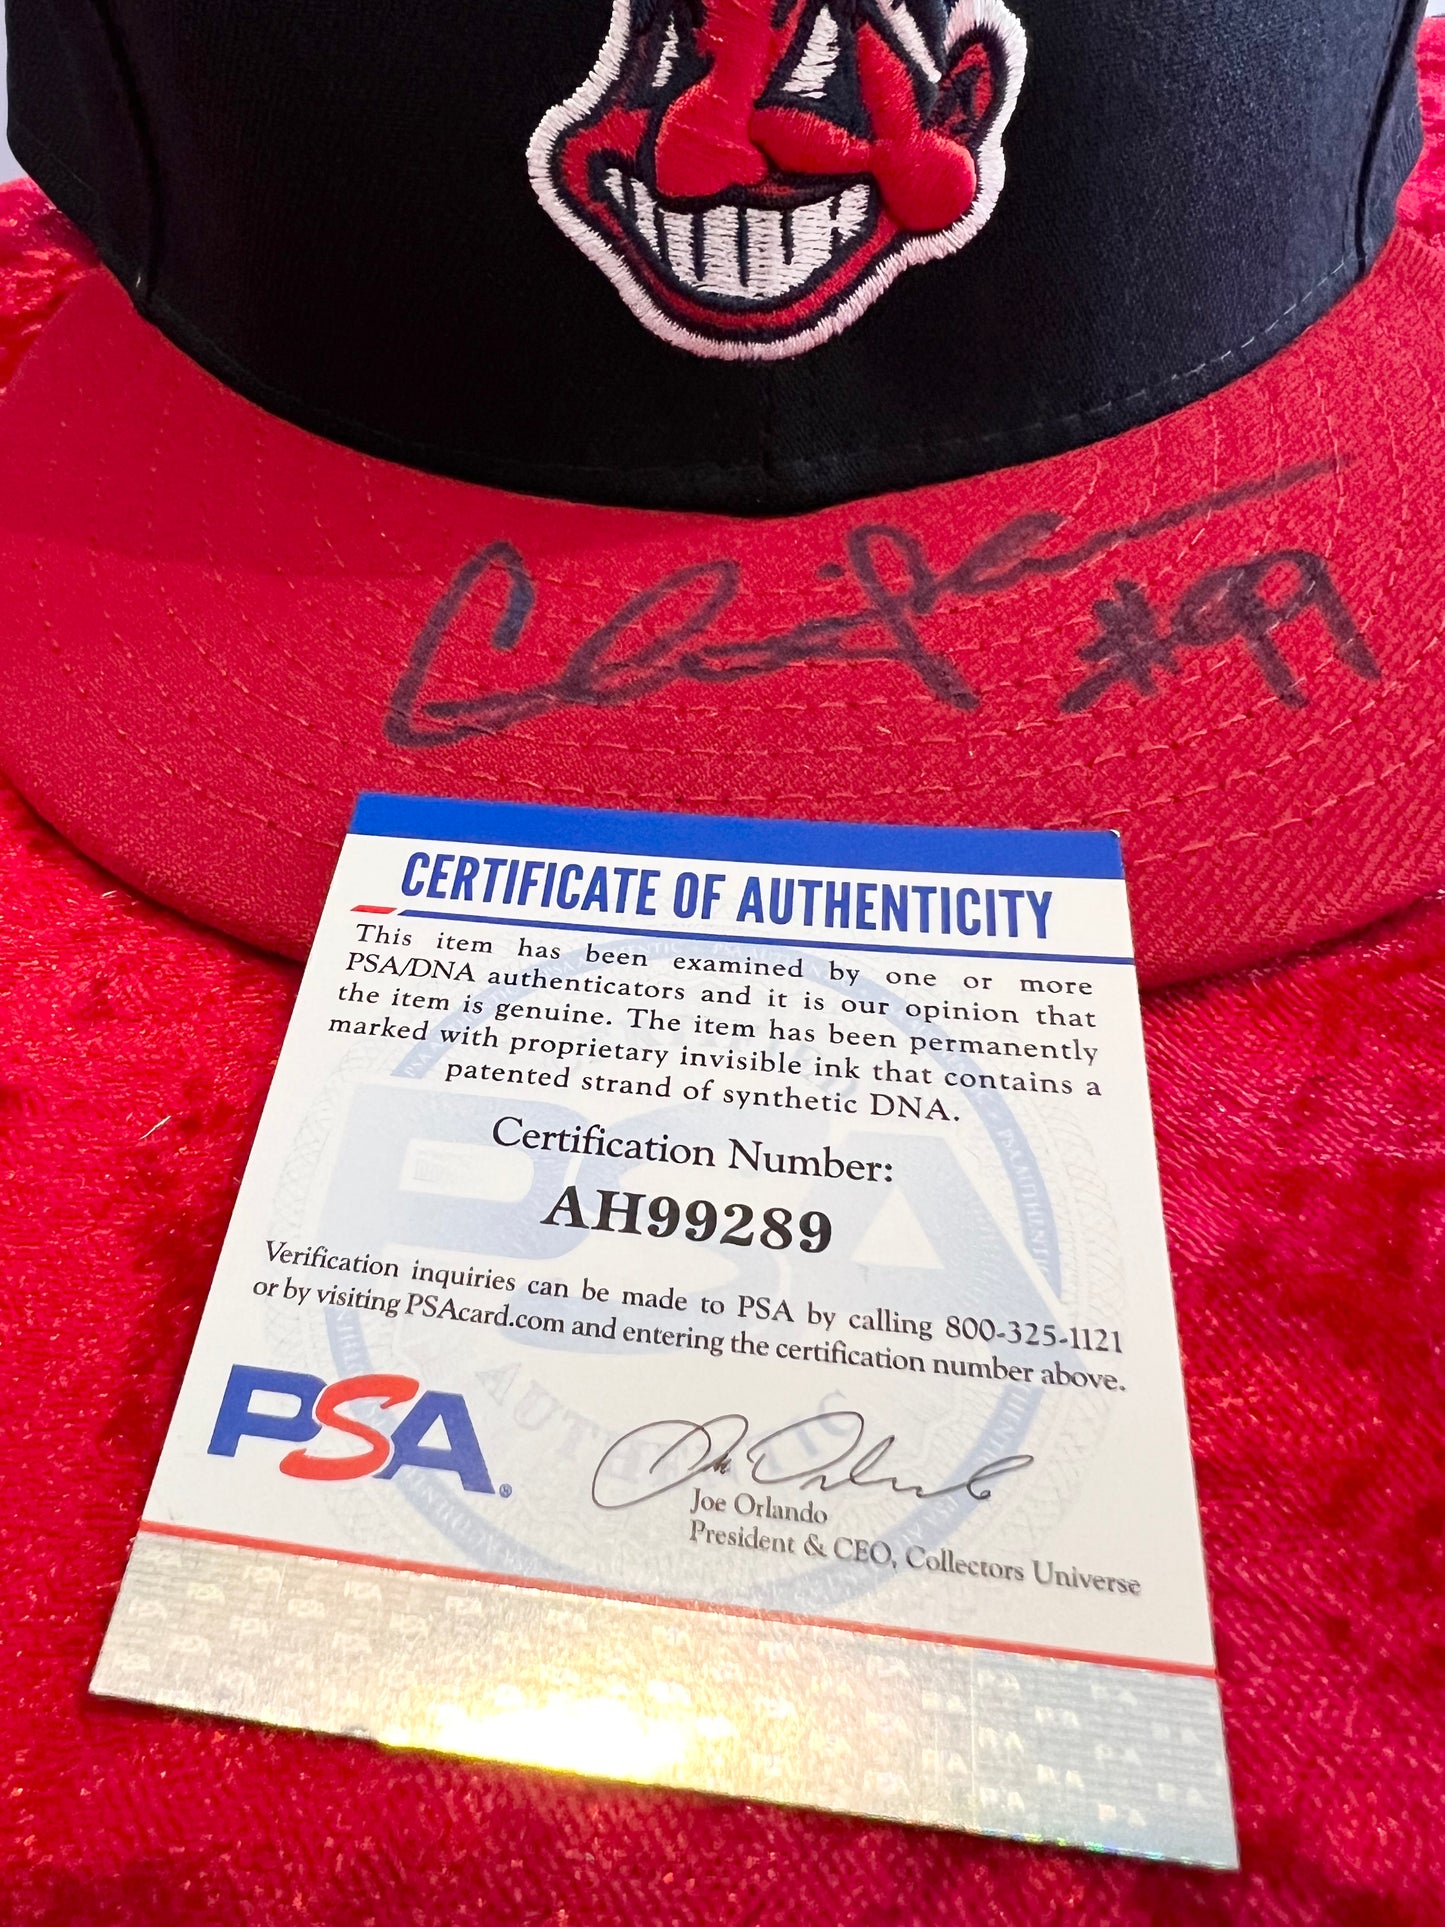 Charlie Sheen Signed Clevland Indians Baseball Hat PSA Authentication RARE